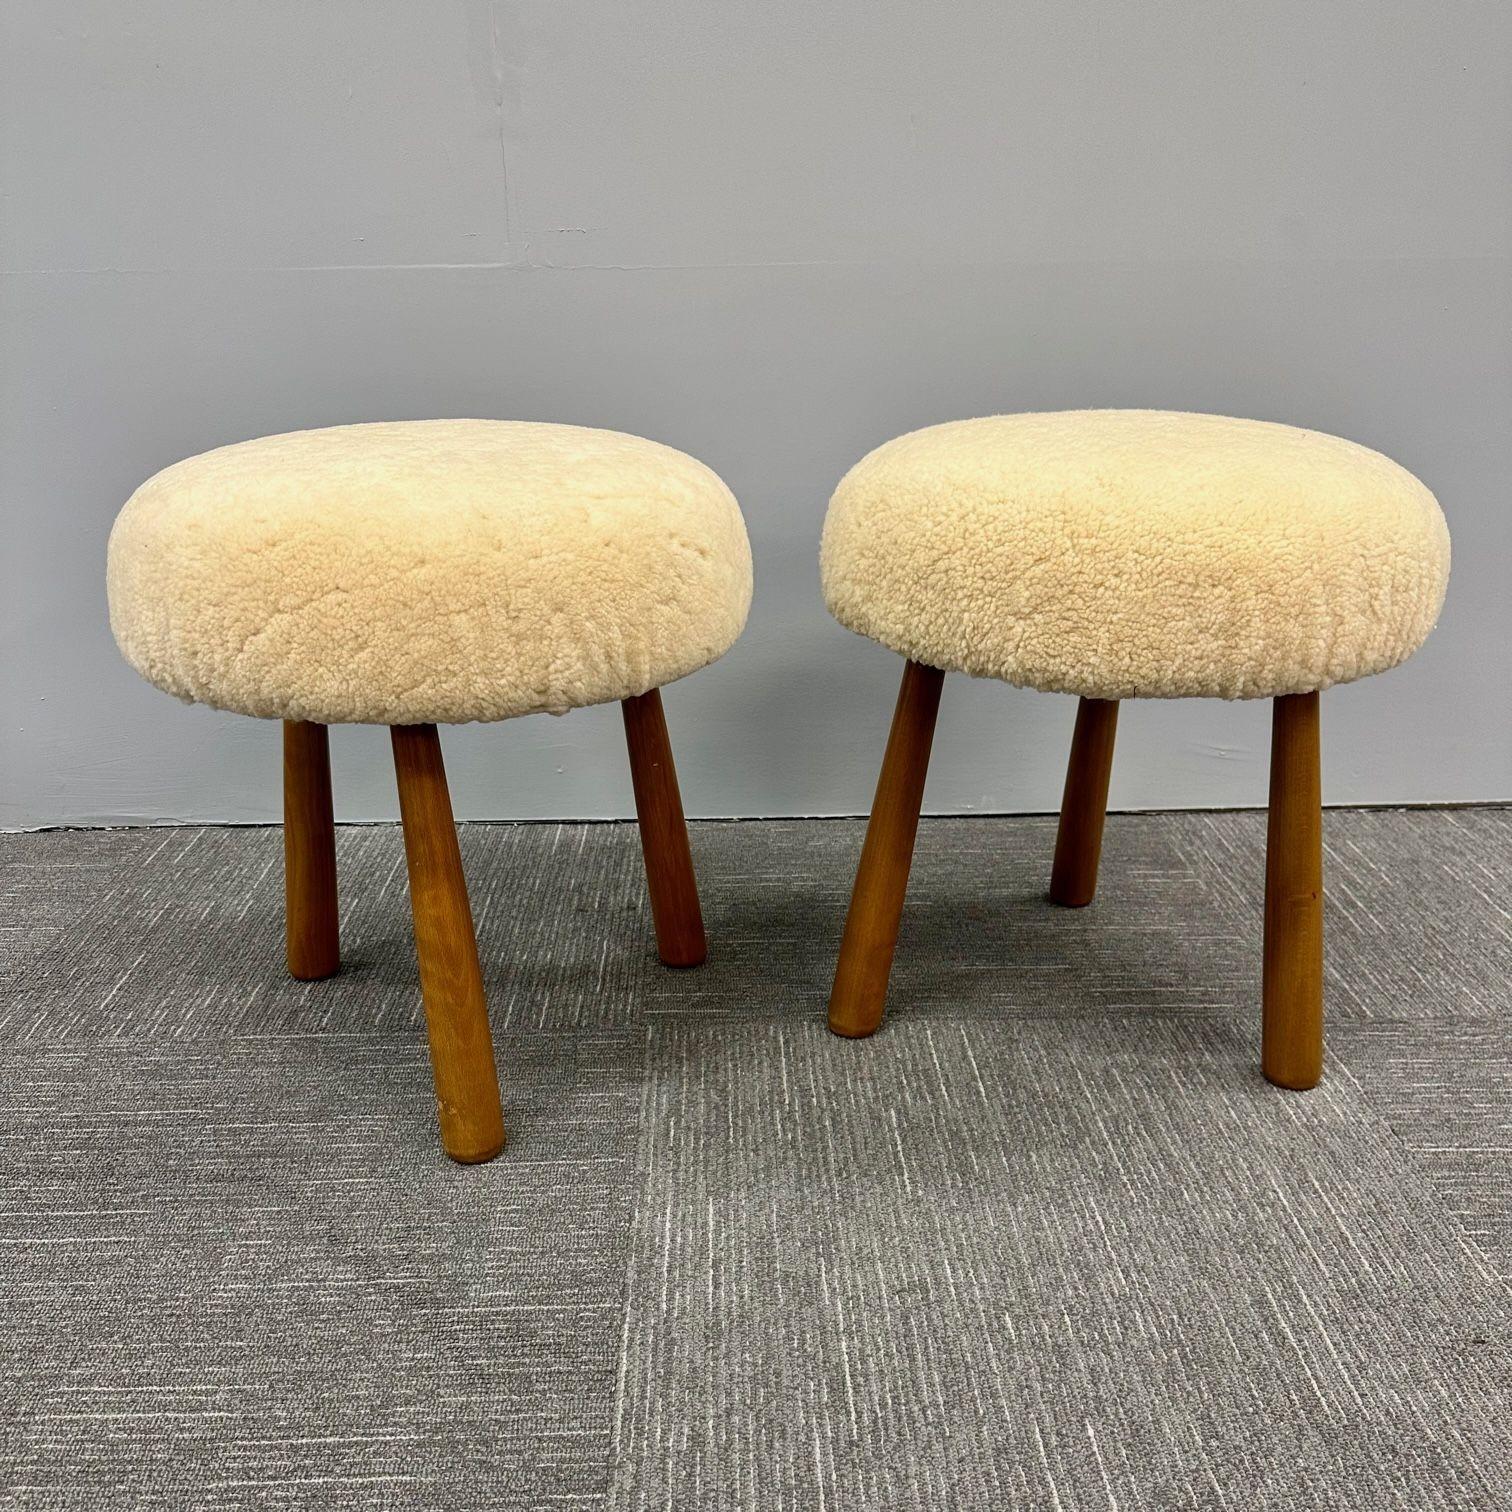 Pair Contemporary Swedish Modern Style Sheepskin Footstools / Ottomans, Beige
Contemporary organic form tri-pod stools or ottomans. New comfortable foam cushioning and black dyed genuine shearling. Overall form and design inspired by Nordic design /